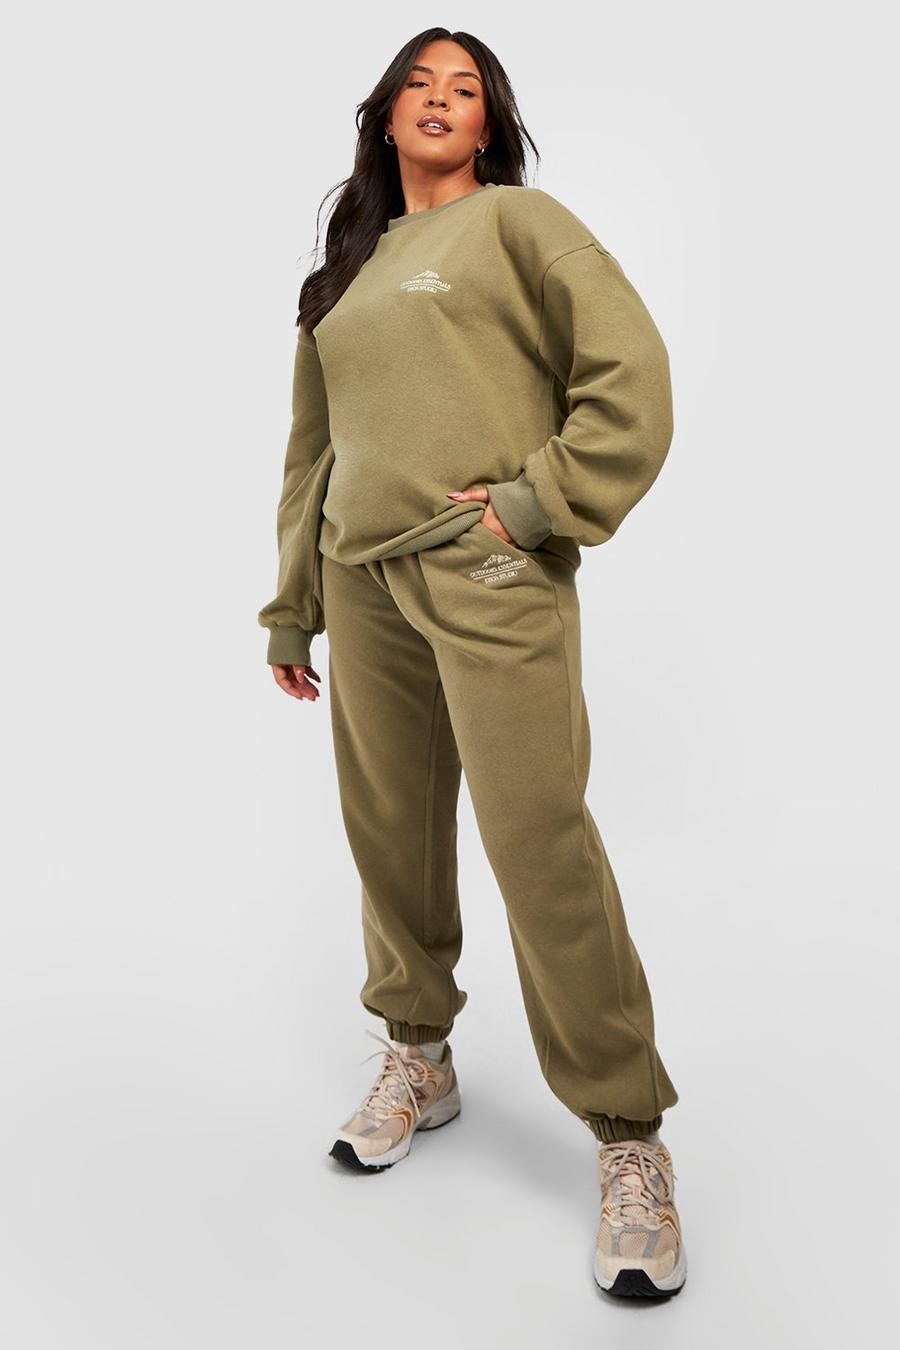 Khaki s Unconventional Beach Outfit Pairs a Backless Shirt With Sweats & Nikes image number 1